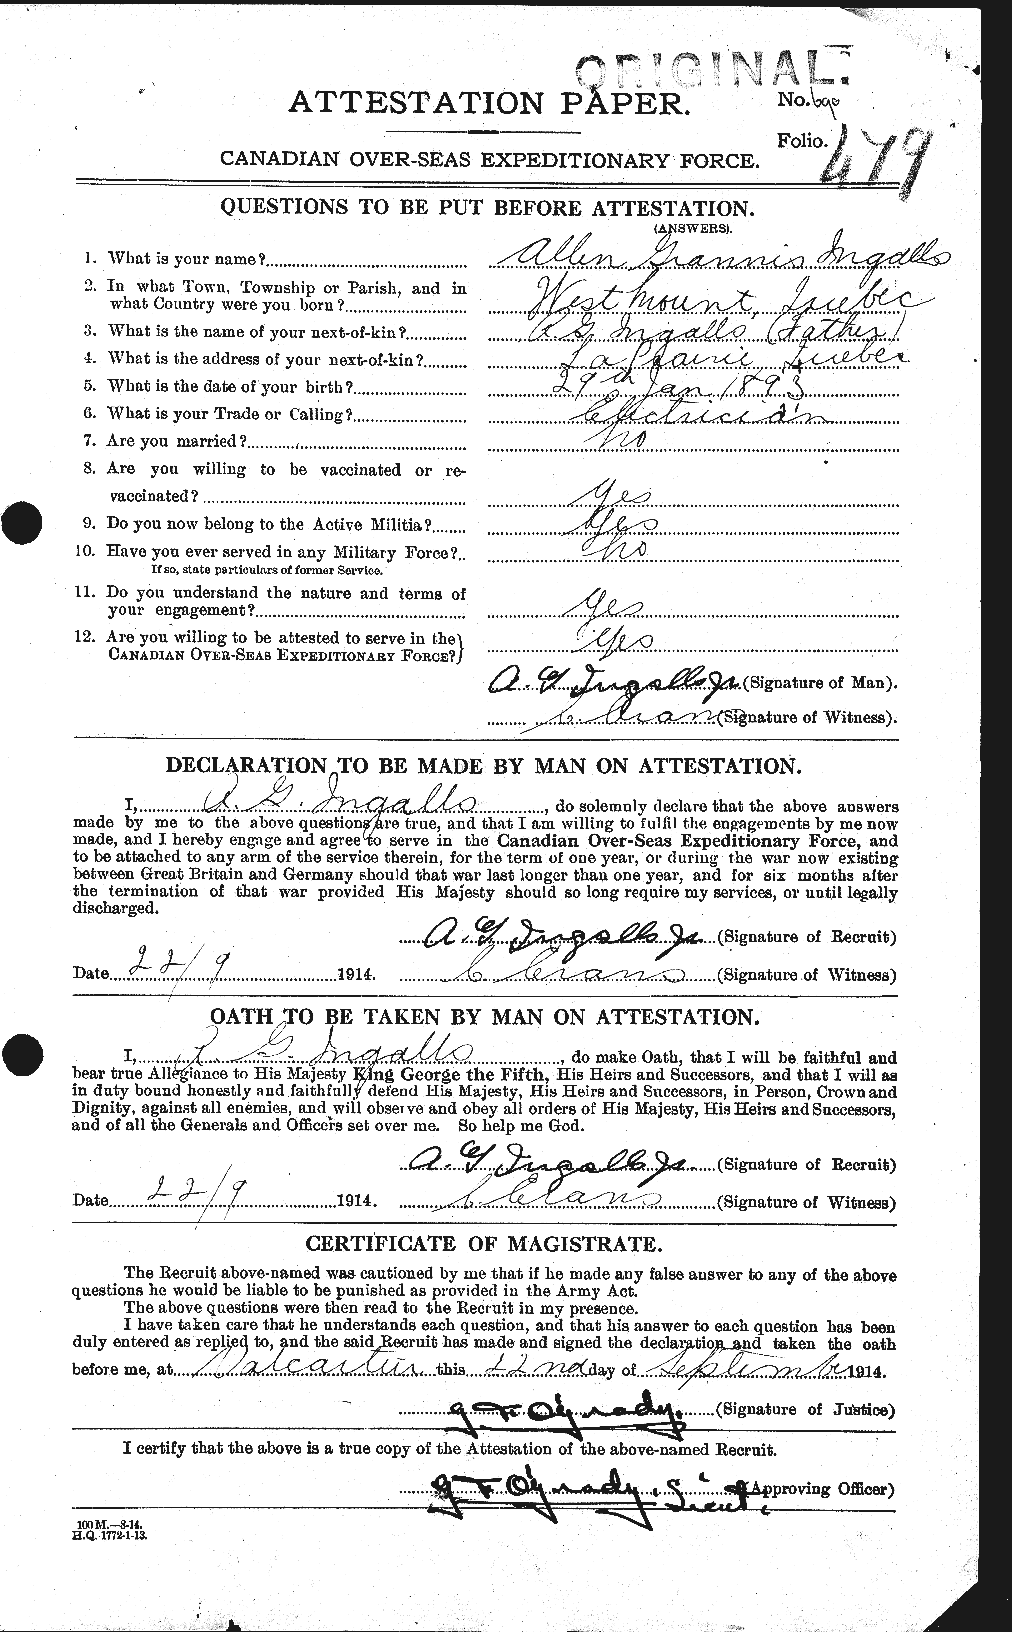 Personnel Records of the First World War - CEF 414903a